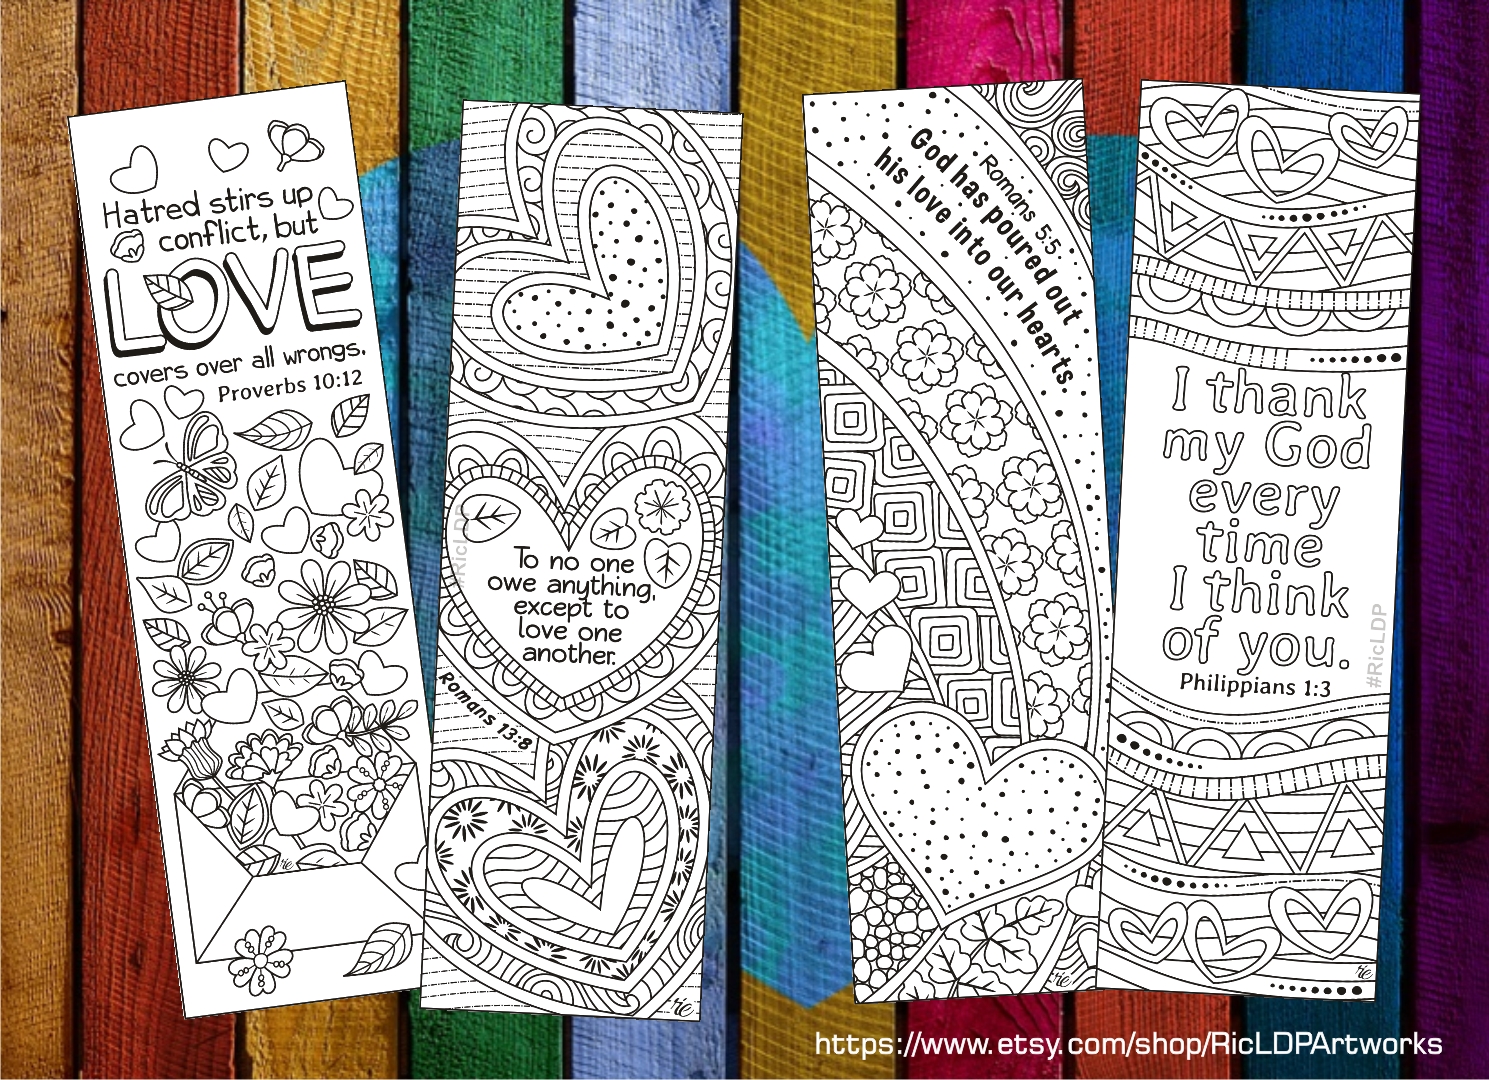 ricldp-artworks-bible-bookmarks-for-valentines-day